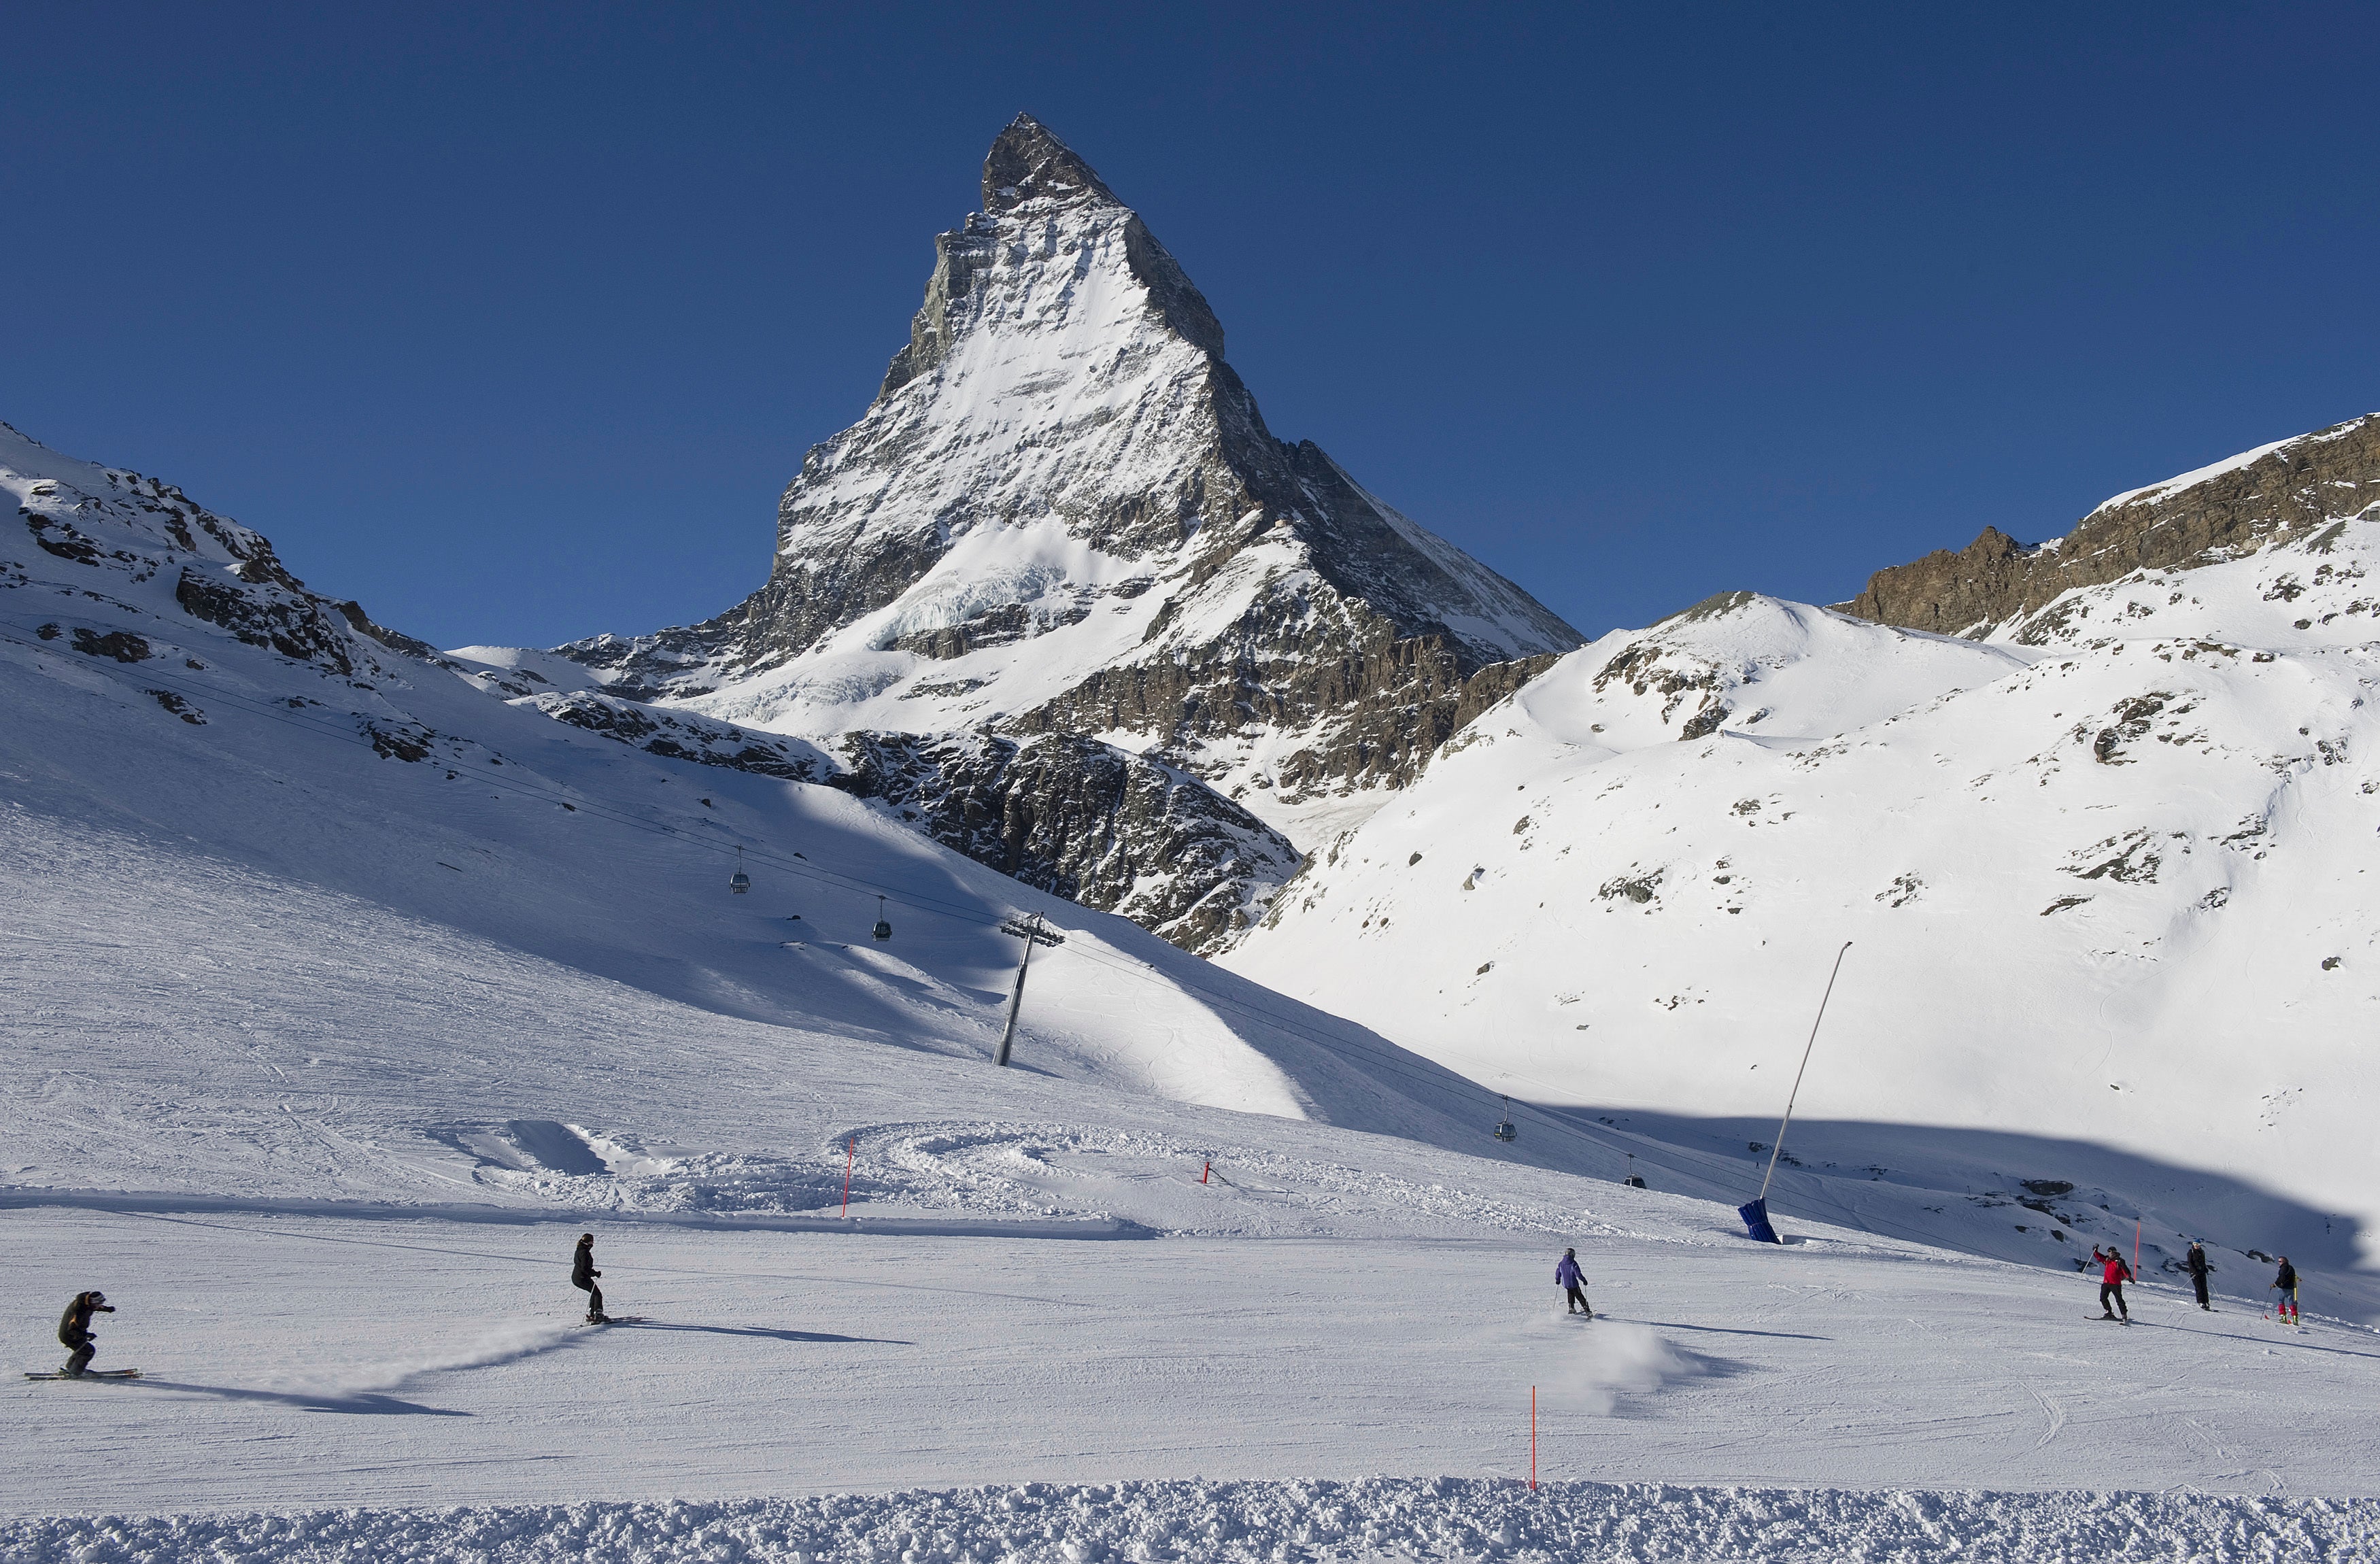 Skiers ride down the slopes at Riffelberg with Mount Matterhorn in the background